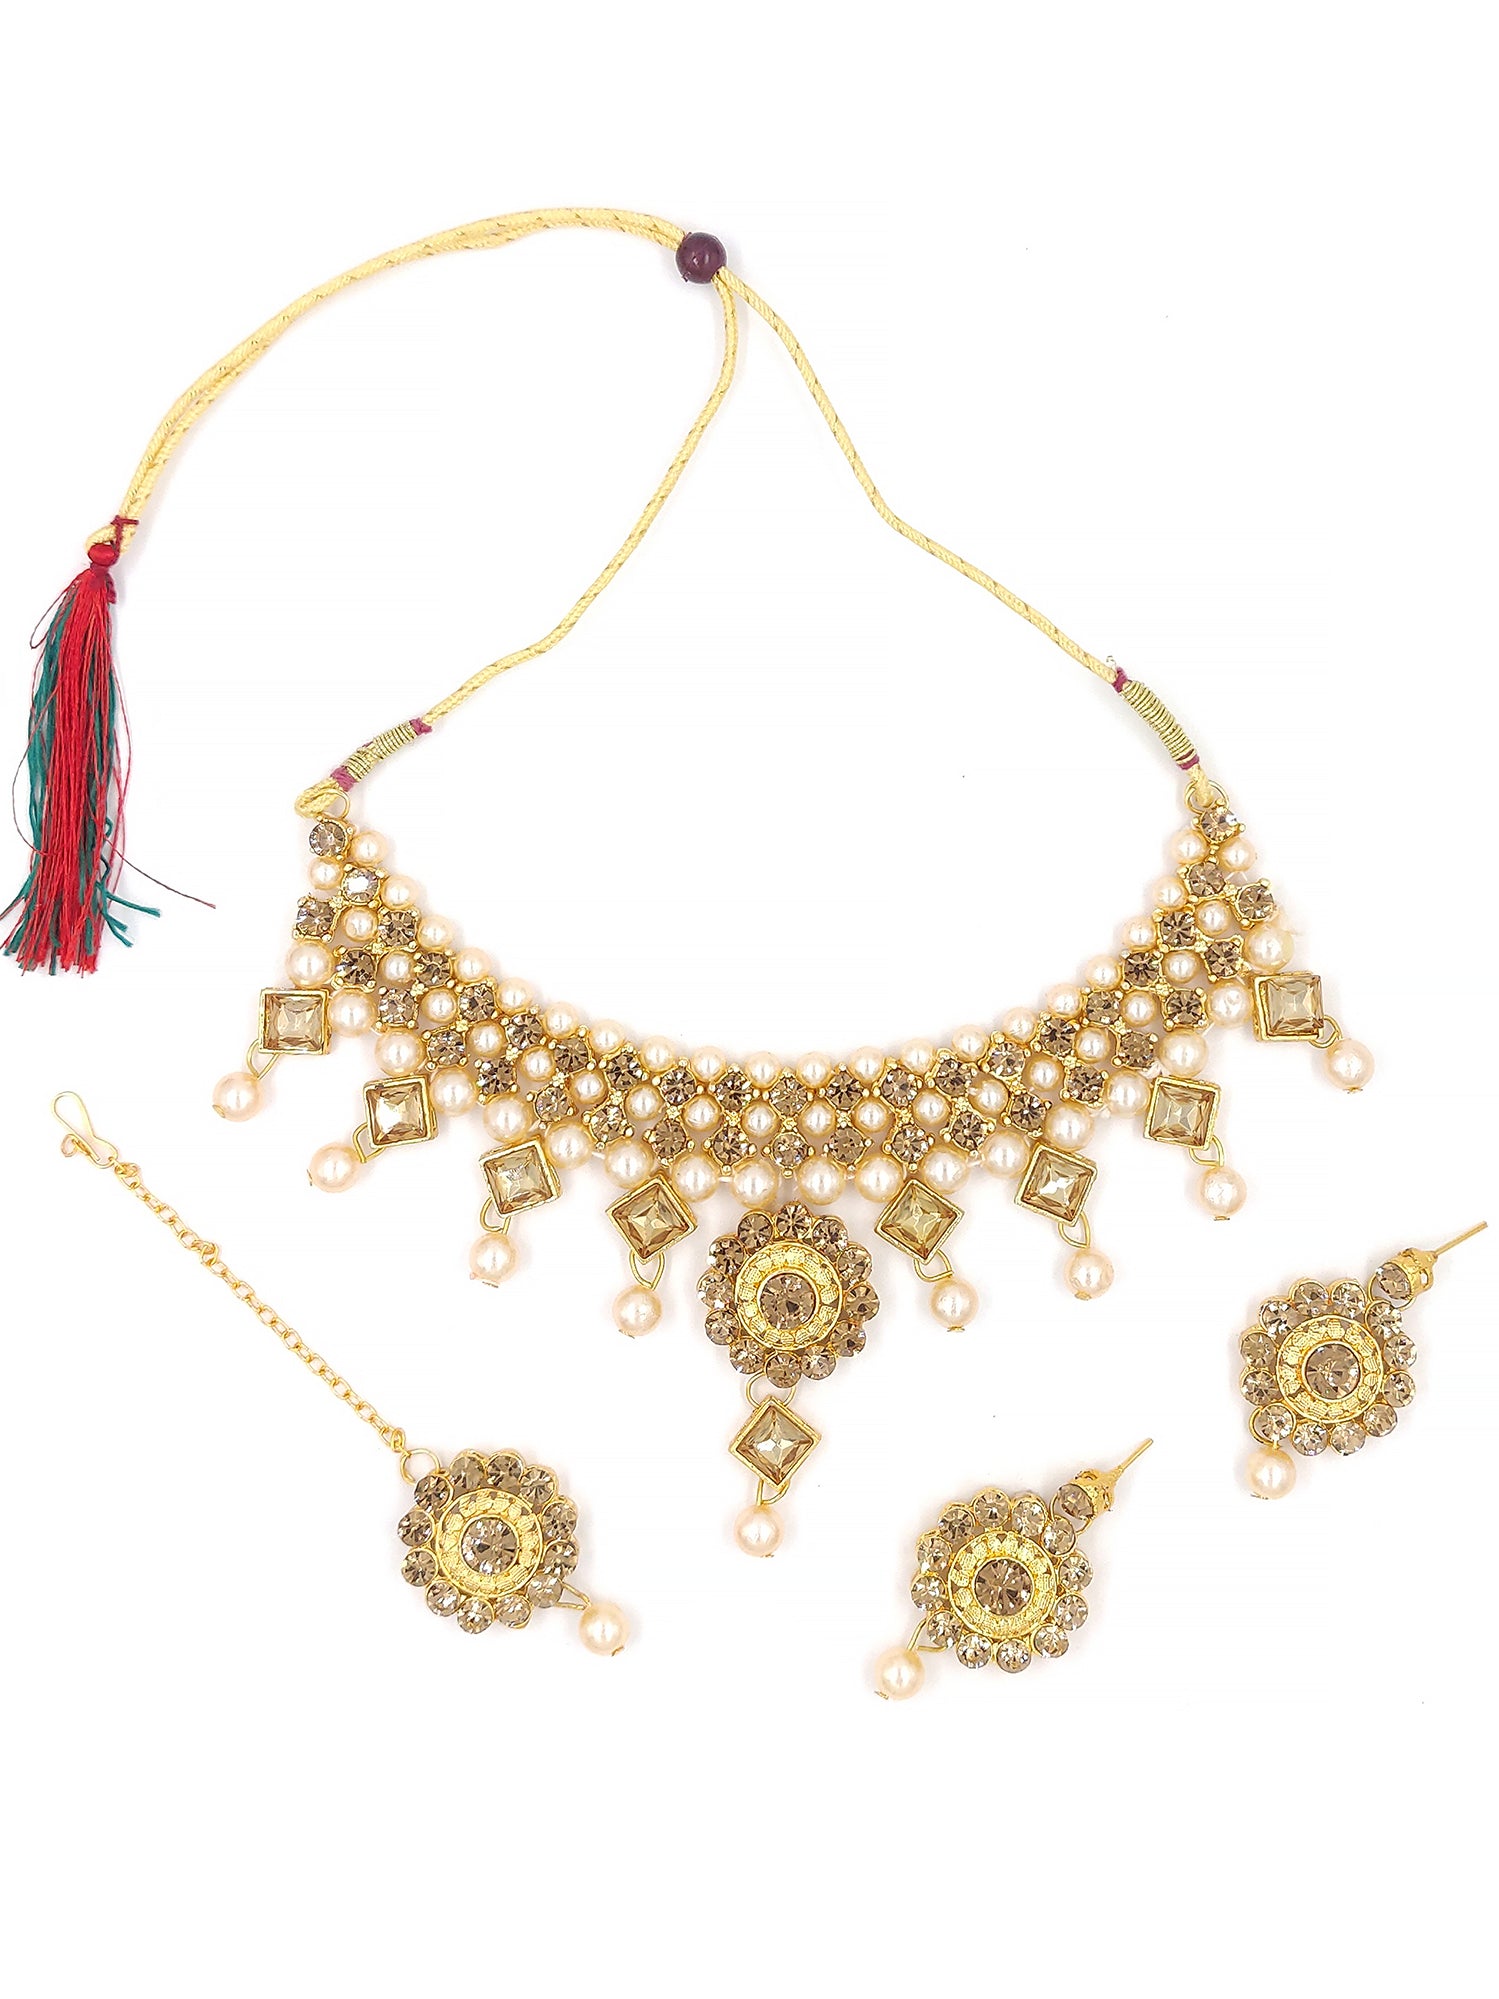 Women's Stylish Gold Choker Necklace With Maang Tikka Earrings  - Zaffre Collections